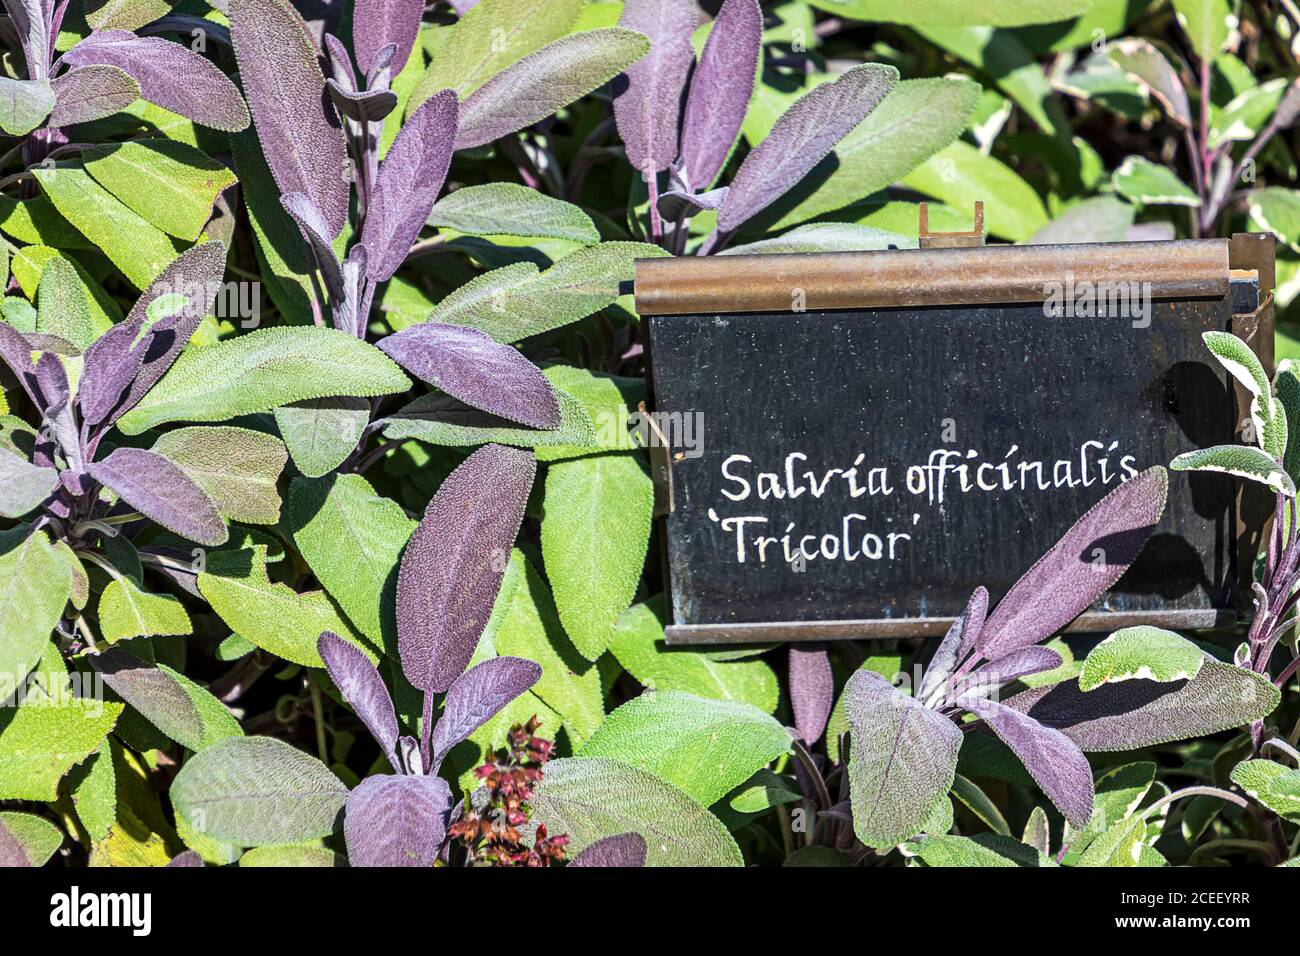 Culinary herb background - Salvia officinalis ‘Tricolor’ Sage Stock Photo